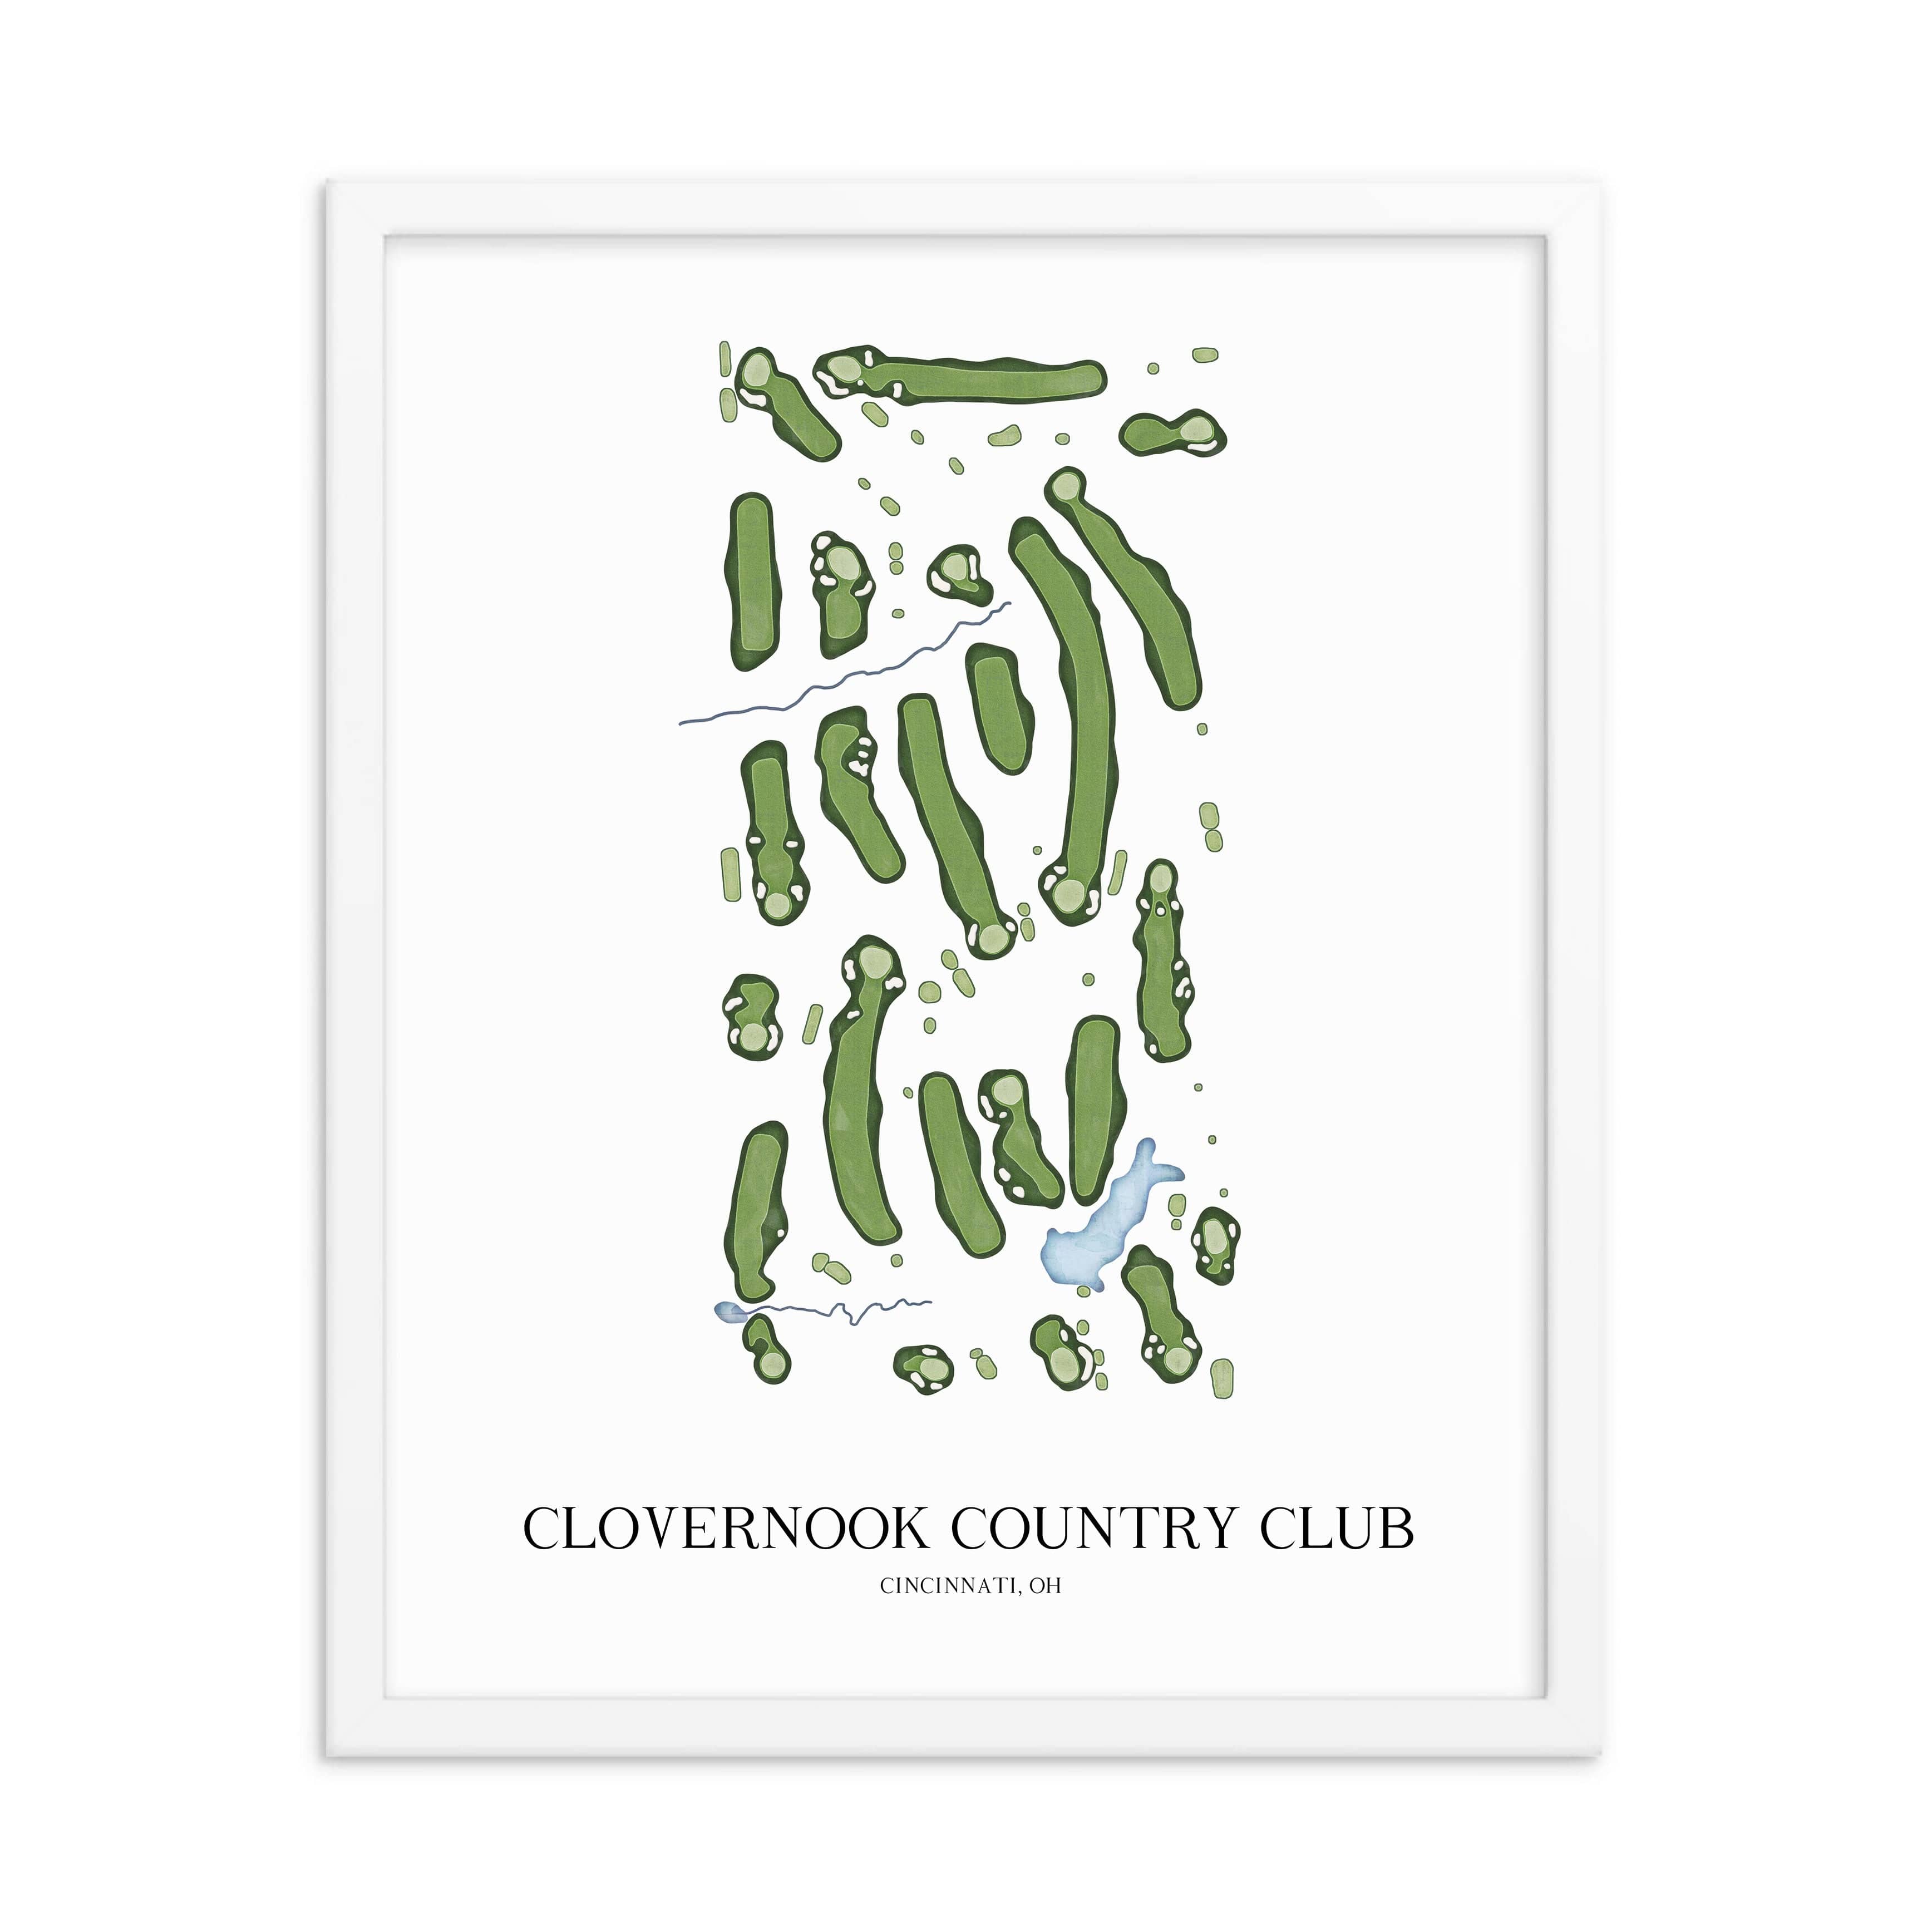 The 19th Hole Golf Shop - Golf Course Prints -  Clovernook Country Club Golf Course Map